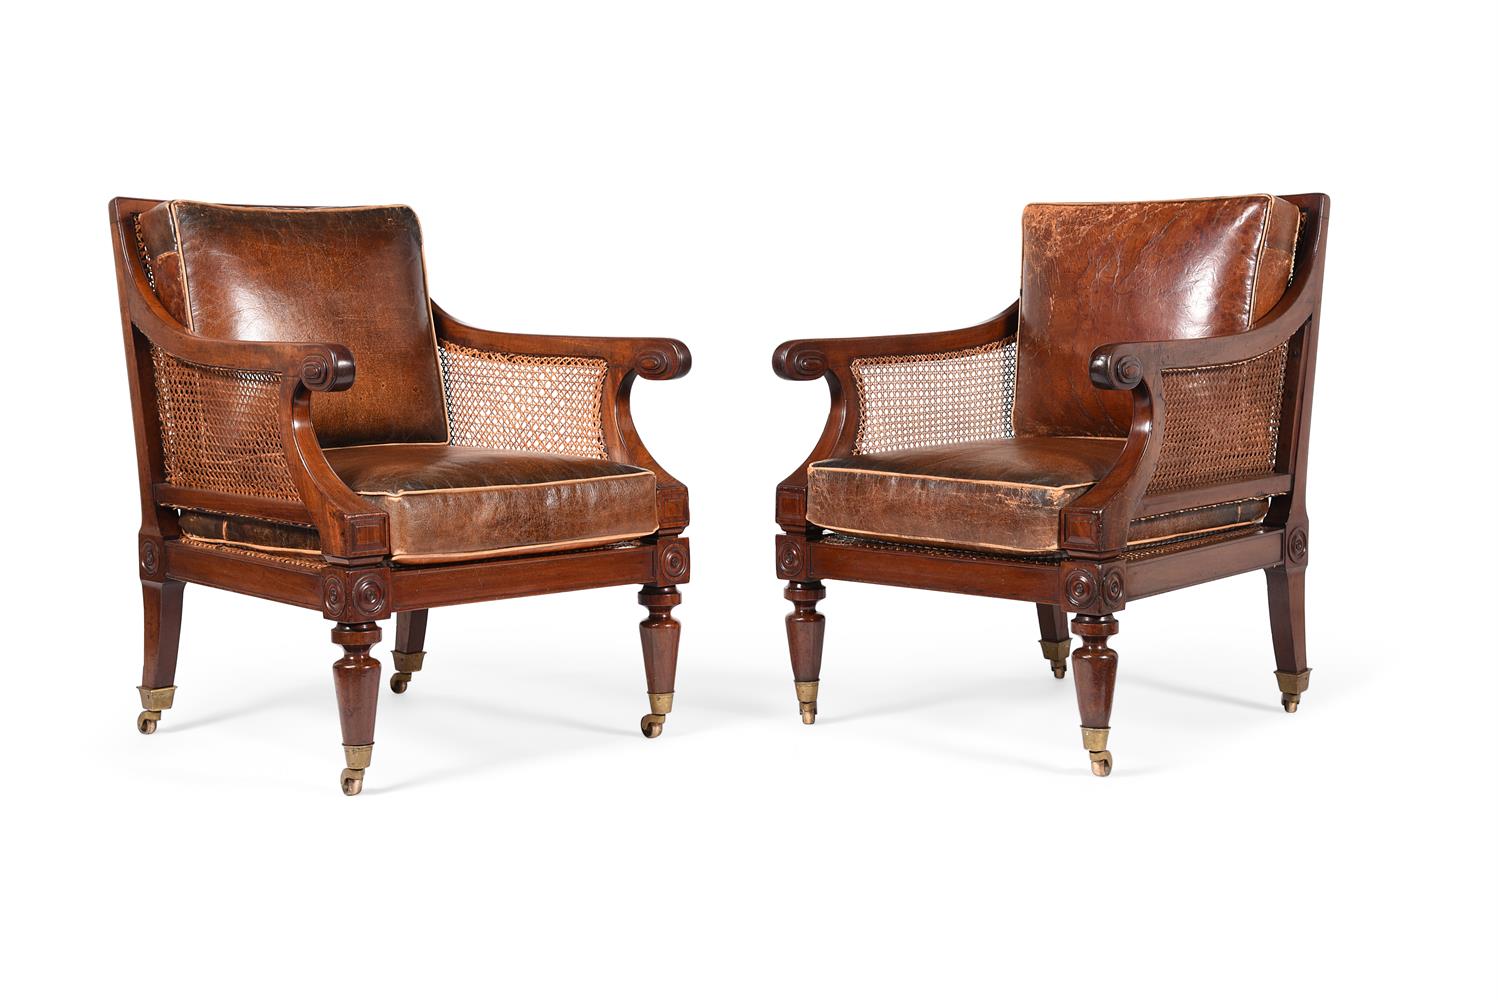 A PAIR OF REGENCY MAHOGANY BERGERE LIBRARY ARMCHAIRS, IN THE MANNER OF CHARLES HEATHCOTE TATHAM